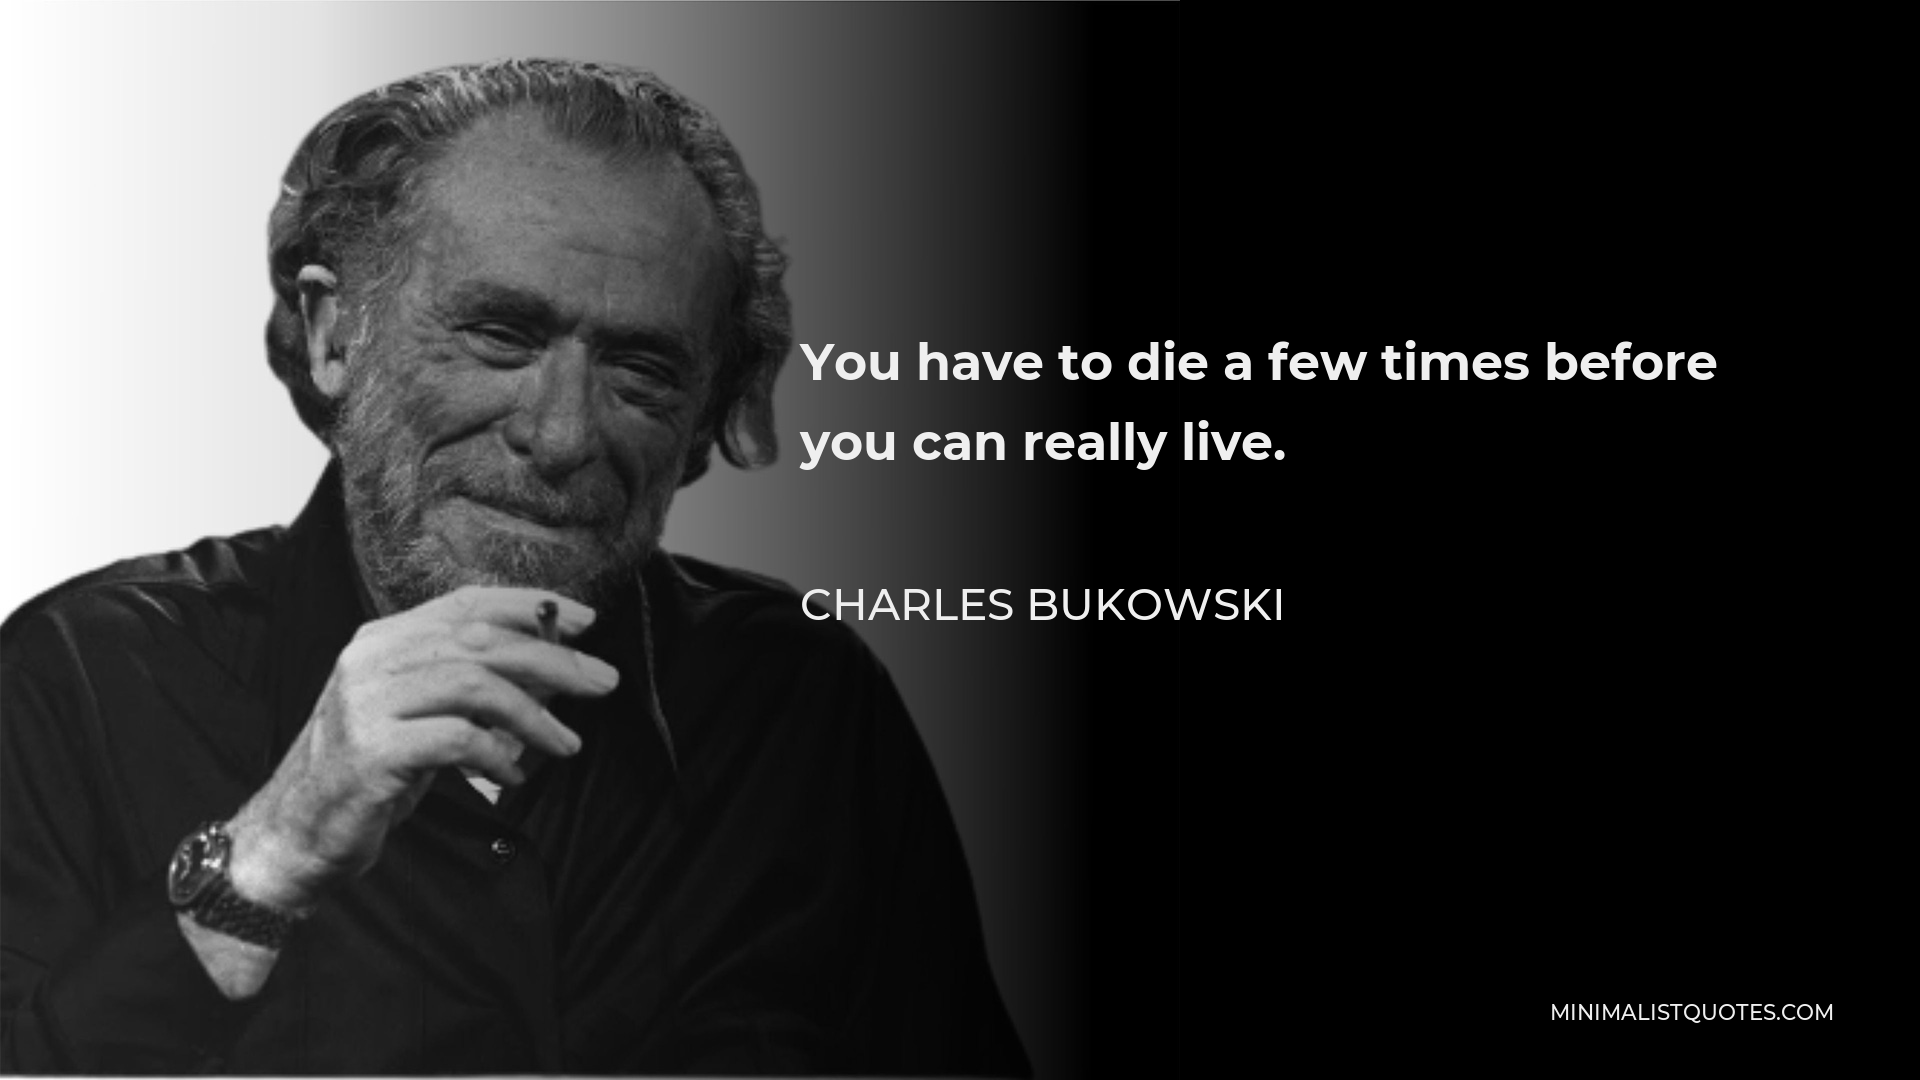 Charles Bukowski Quote - You have to die a few times before you can really live.